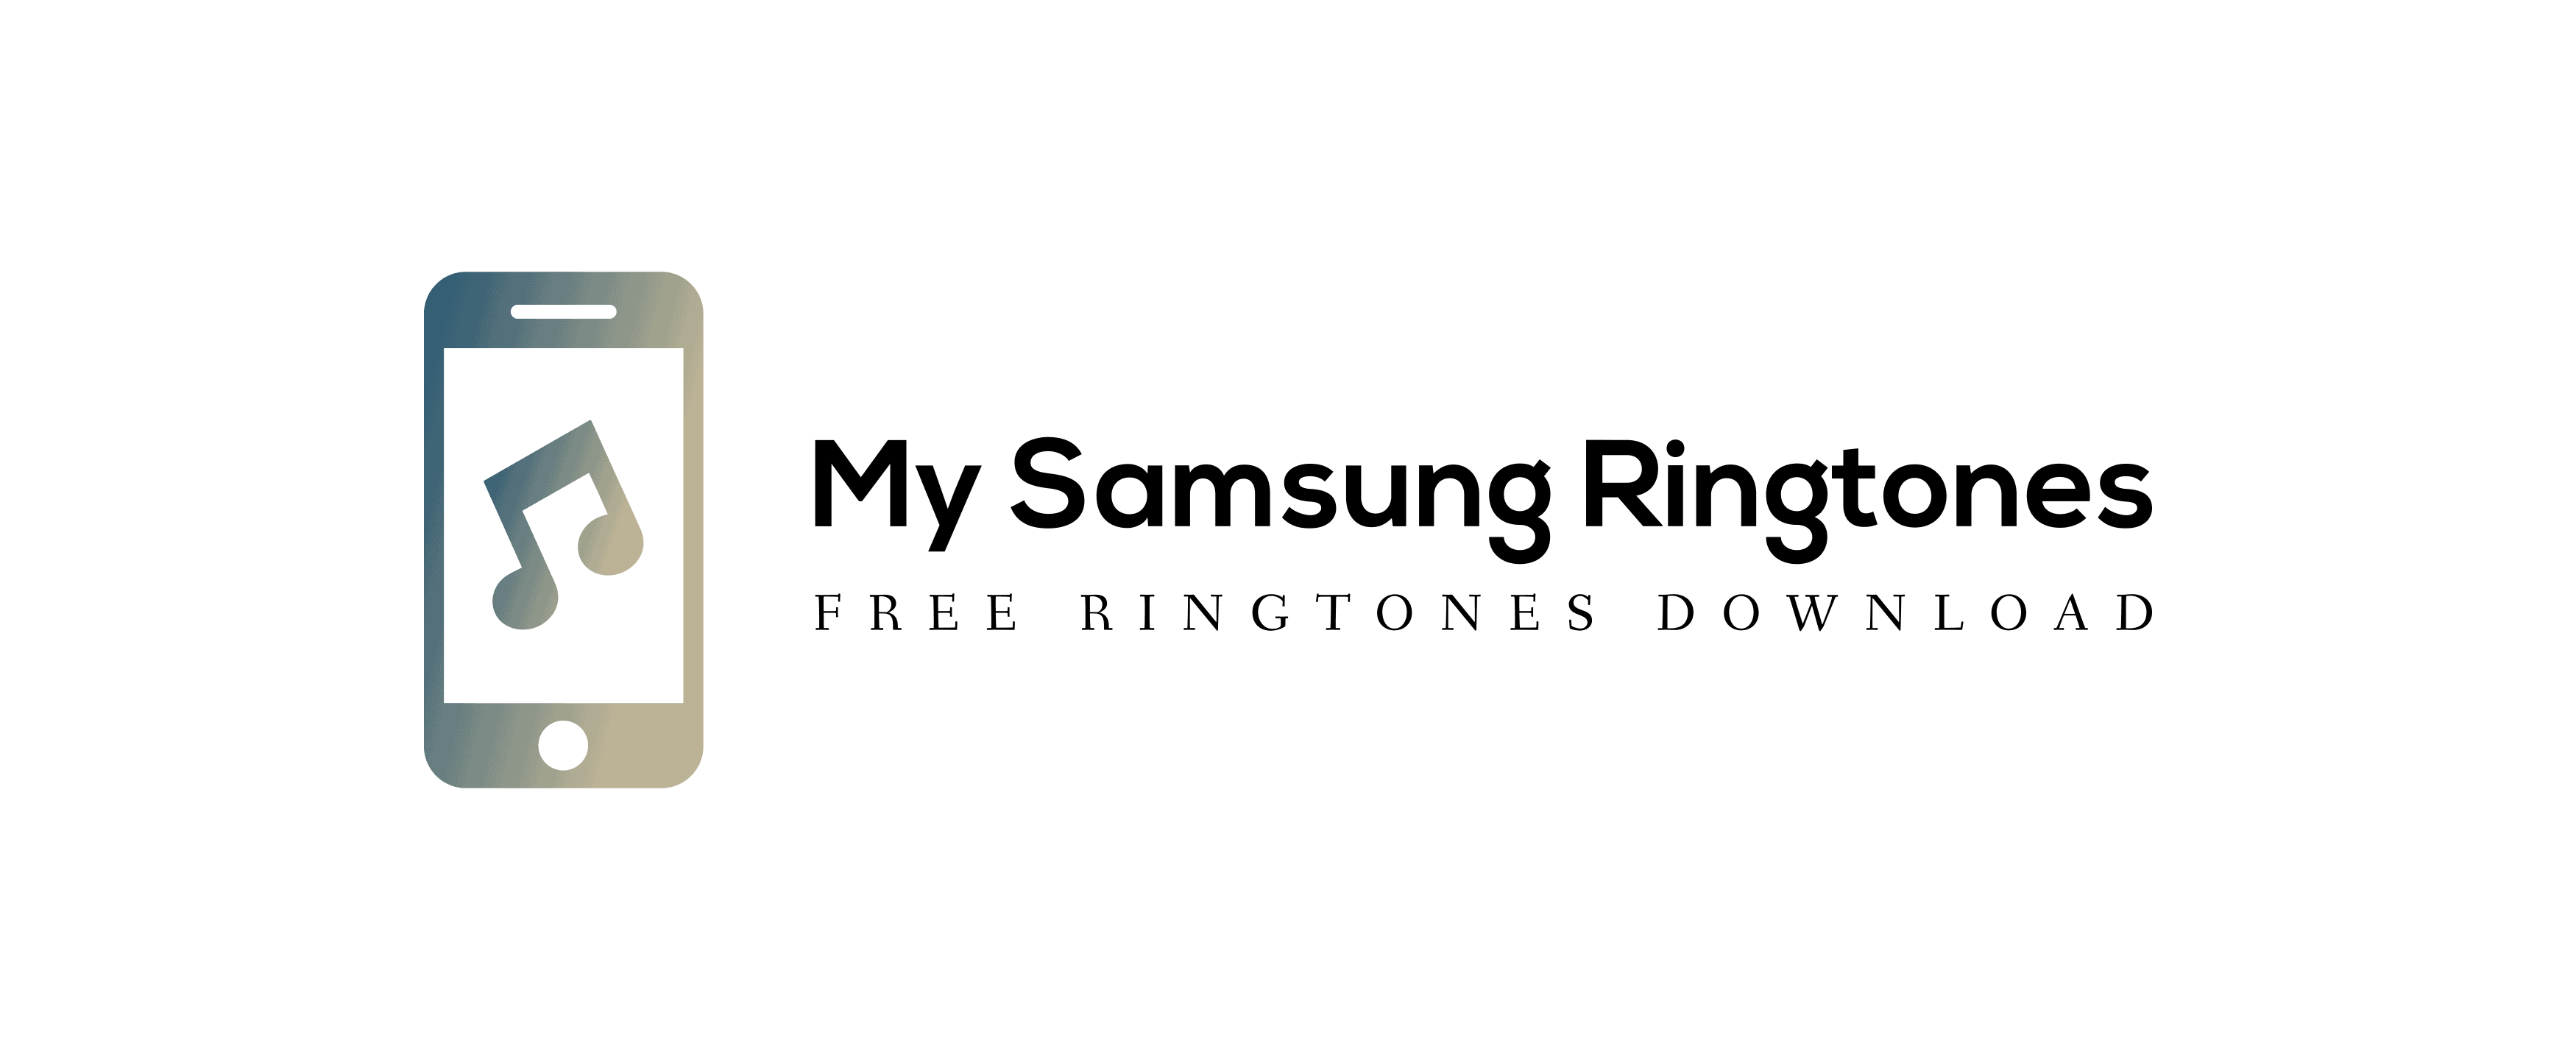 Samsung Ringtones Free Mp3 Download For Android Iphone